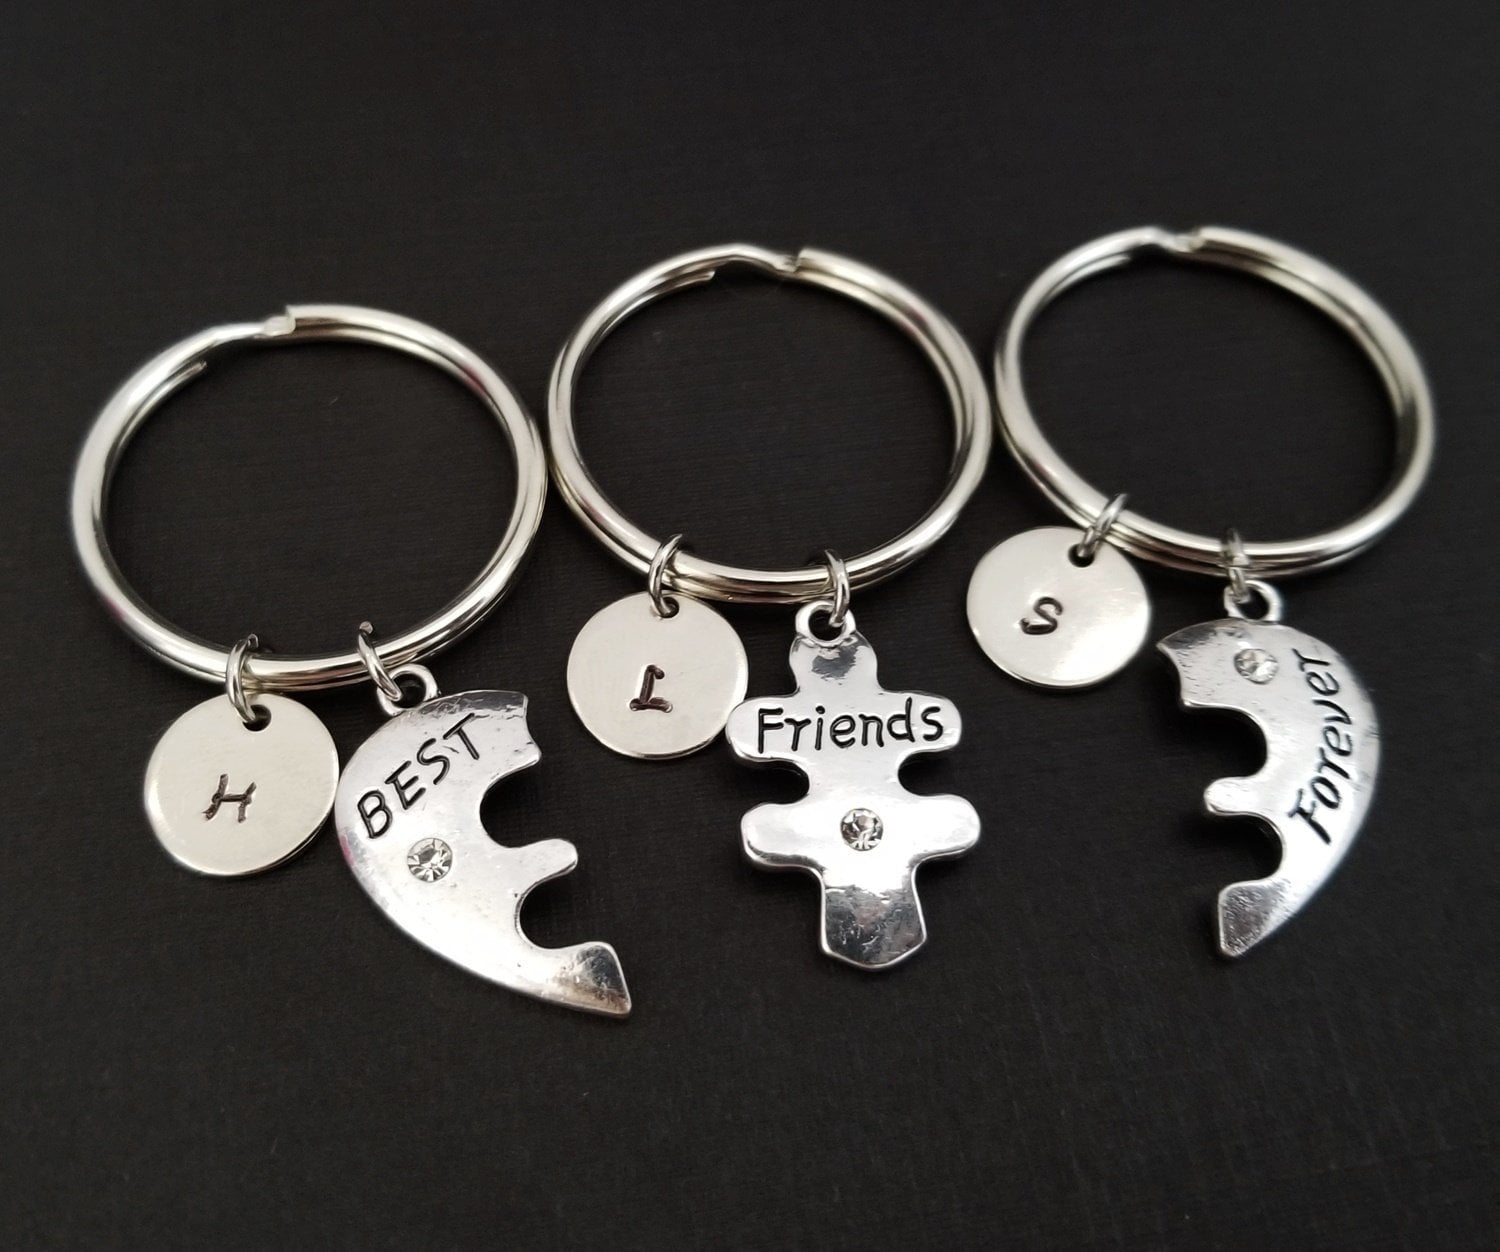 Monogram key chains! If someone got me this I would love them forever.